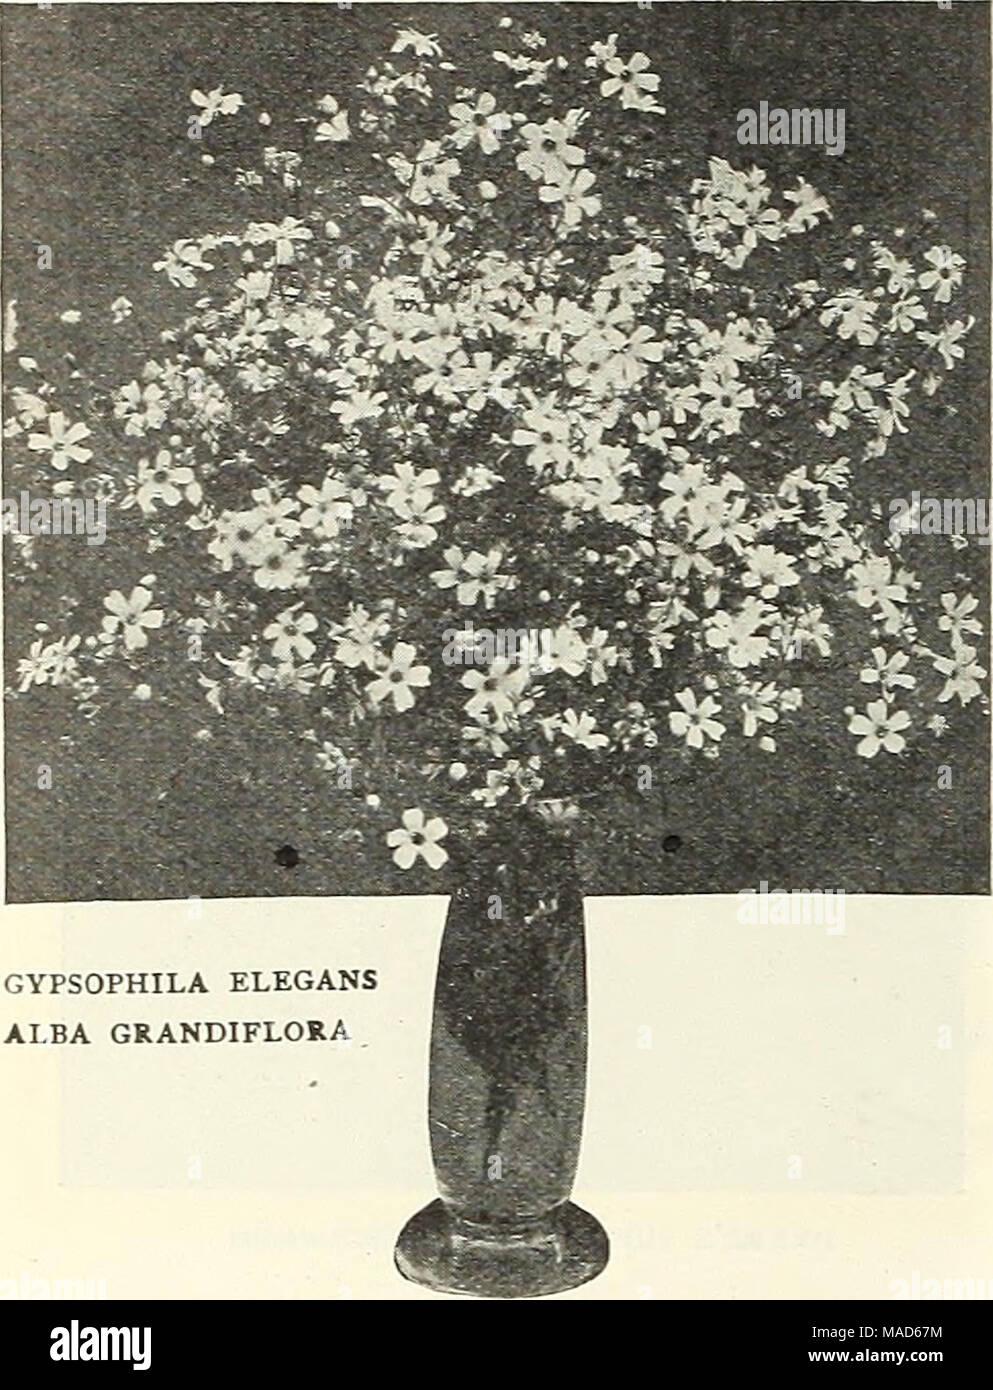 . Dreer's special mid-summer offer for florists 1922 : reliable flower seeds flor florists spring flowering bulbs for florists . GYPSOPHILA ELEGANS ALBA GRANDIFLORA Dracaena. It is always well to have a lot of these cominK along, they are so useful as centre plants, etc. Seeds are sent ont in the herry or hull, and should be rubbed out before sowing. Tr. pkt. Ox. AustrallB. Broad leaved variety 20 $0 60 IndMsa. The popular centre plant for vases, etc., lone narrow sraceful foliage â - â â $1.00 per'/i-lb. 10 30 Fern Spores. We can furnish spores of the following splendid varieties at 50 cents  Stock Photo